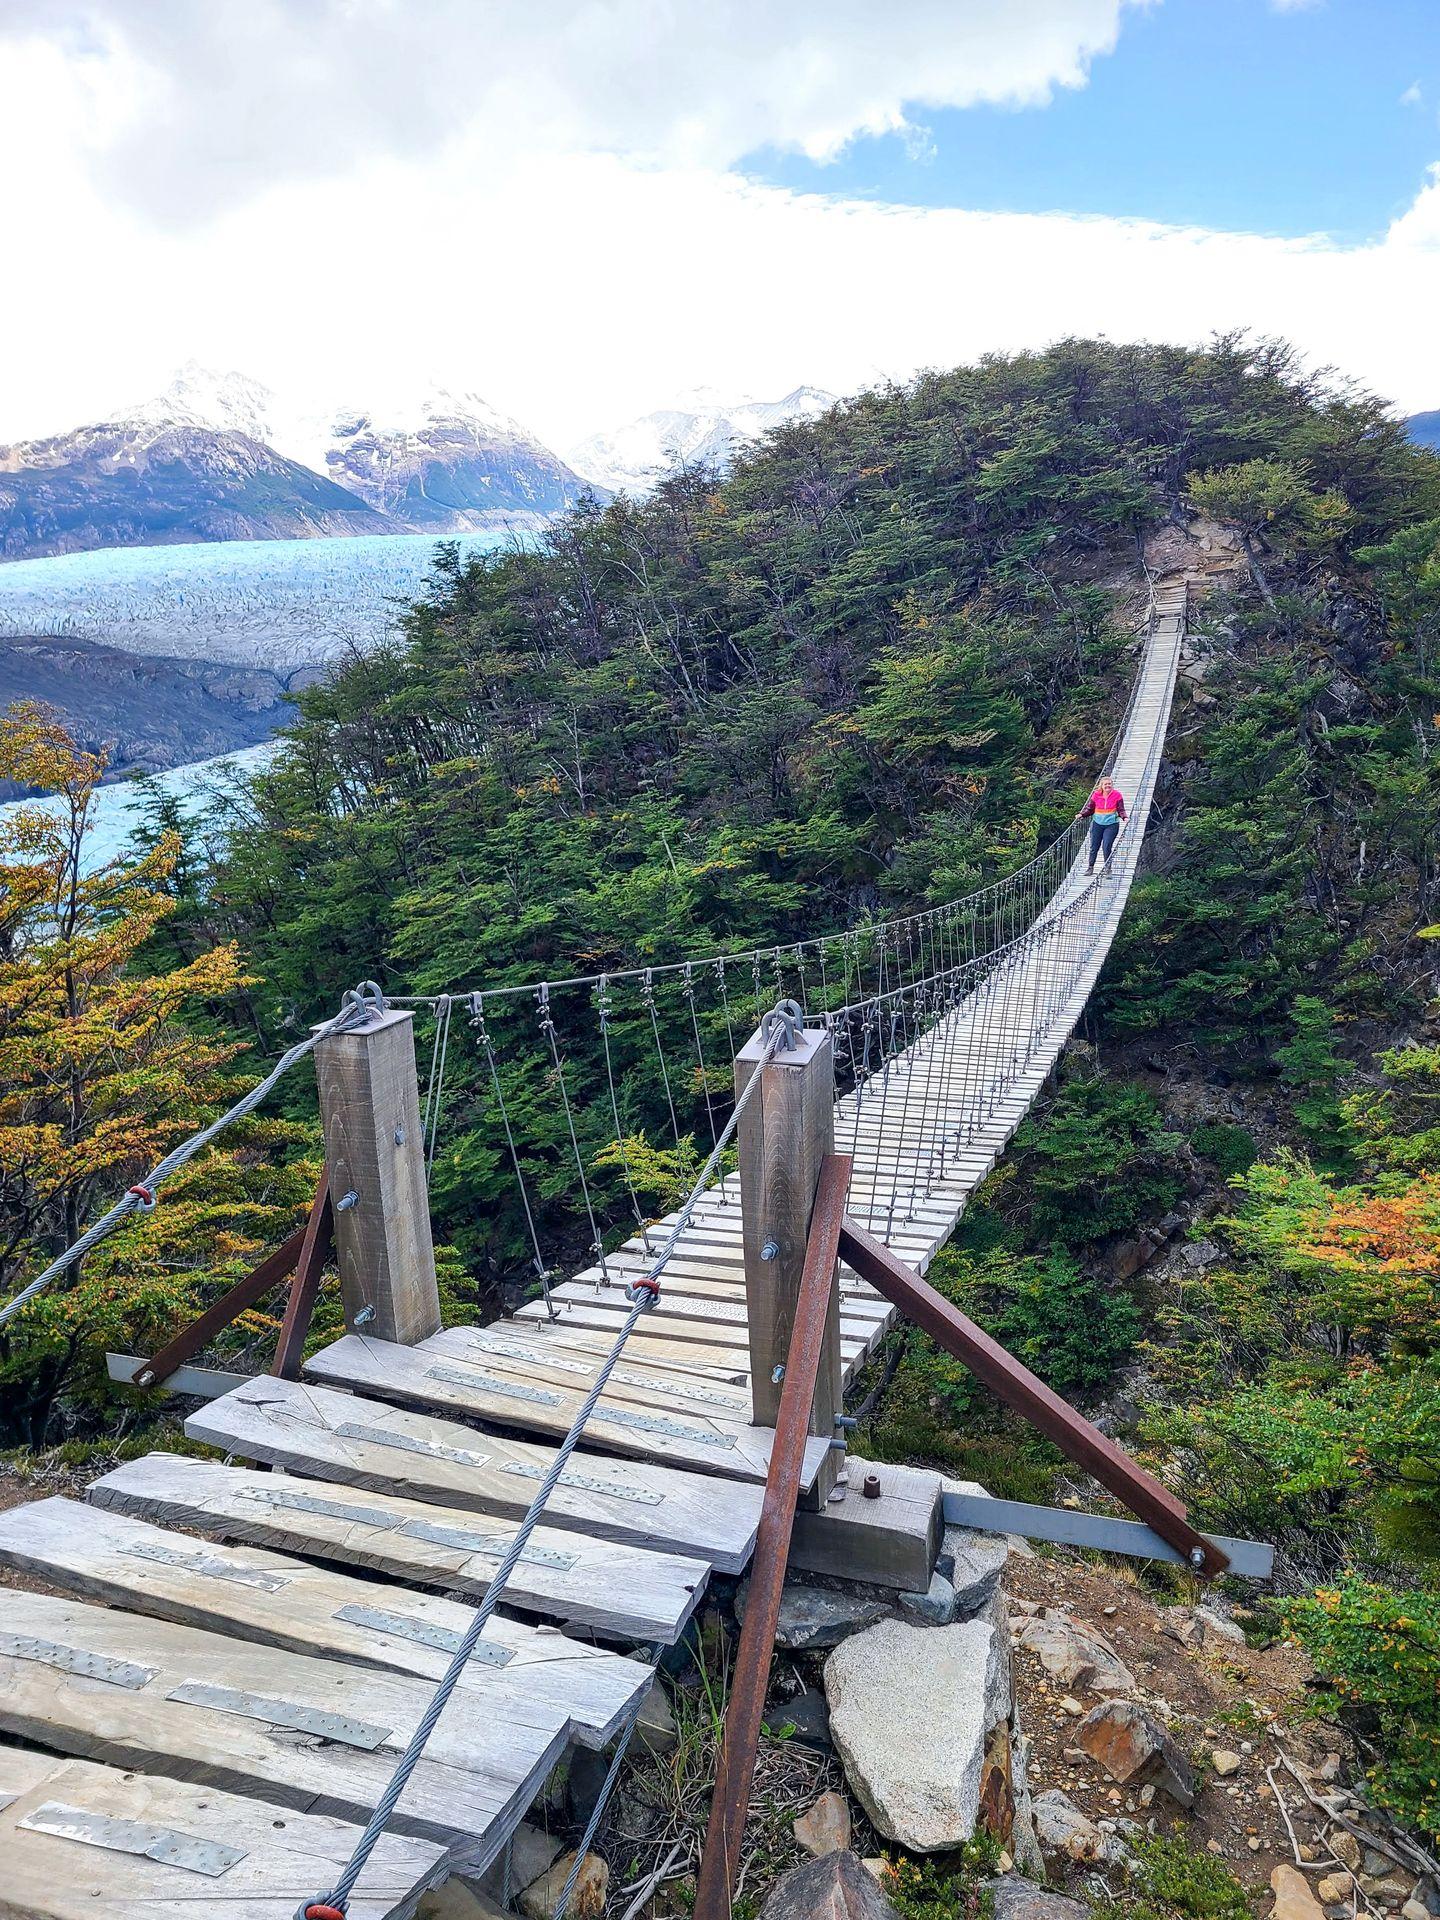 Lydia standing in the middle of a long suspension bridge. In the background, you can see the Grey Glacier.